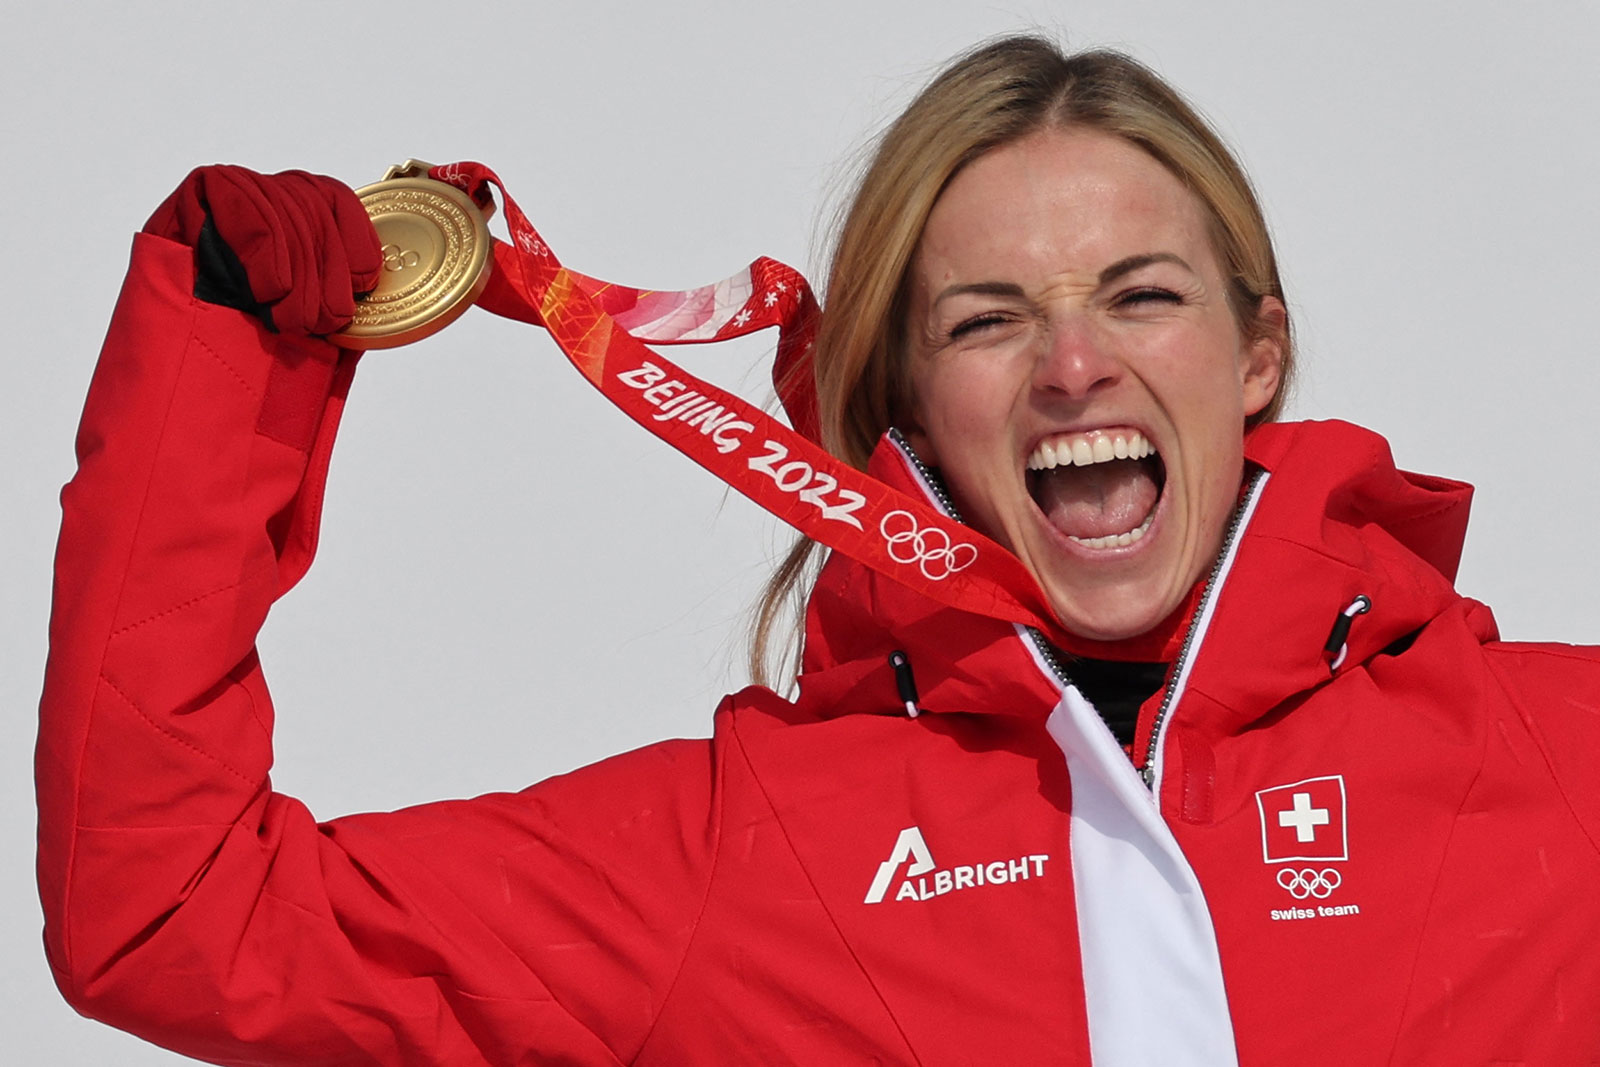 Switzerland's Lara Gut-Behrami celebrates on the podium with her gold medal for winning the women's super-G on Feb. 11